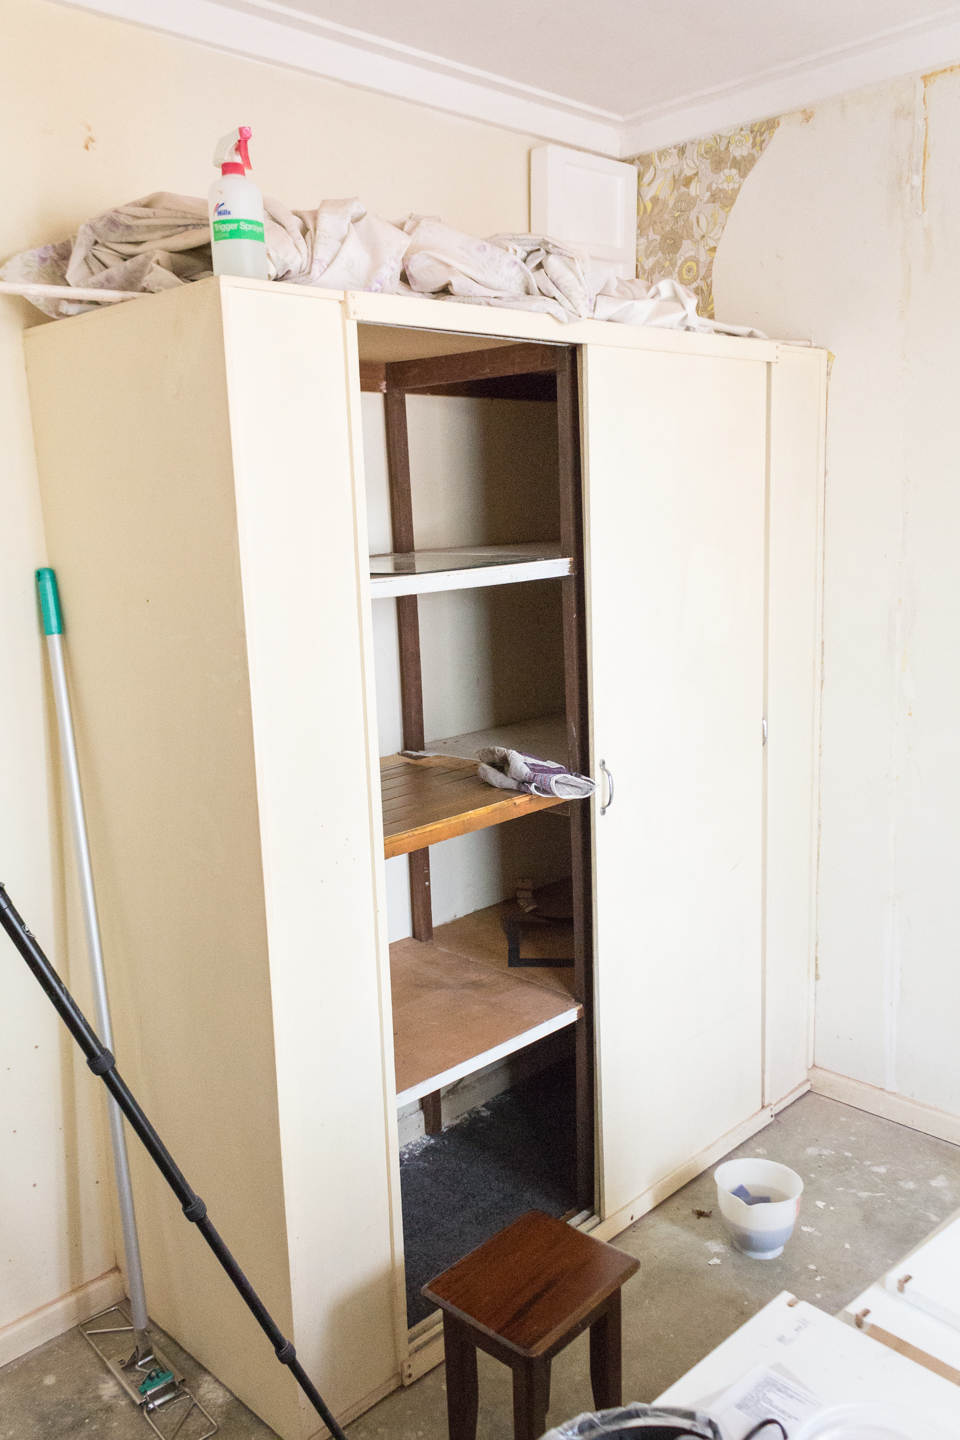 The very unusable wardrobe which also had mold growing on the bottom!